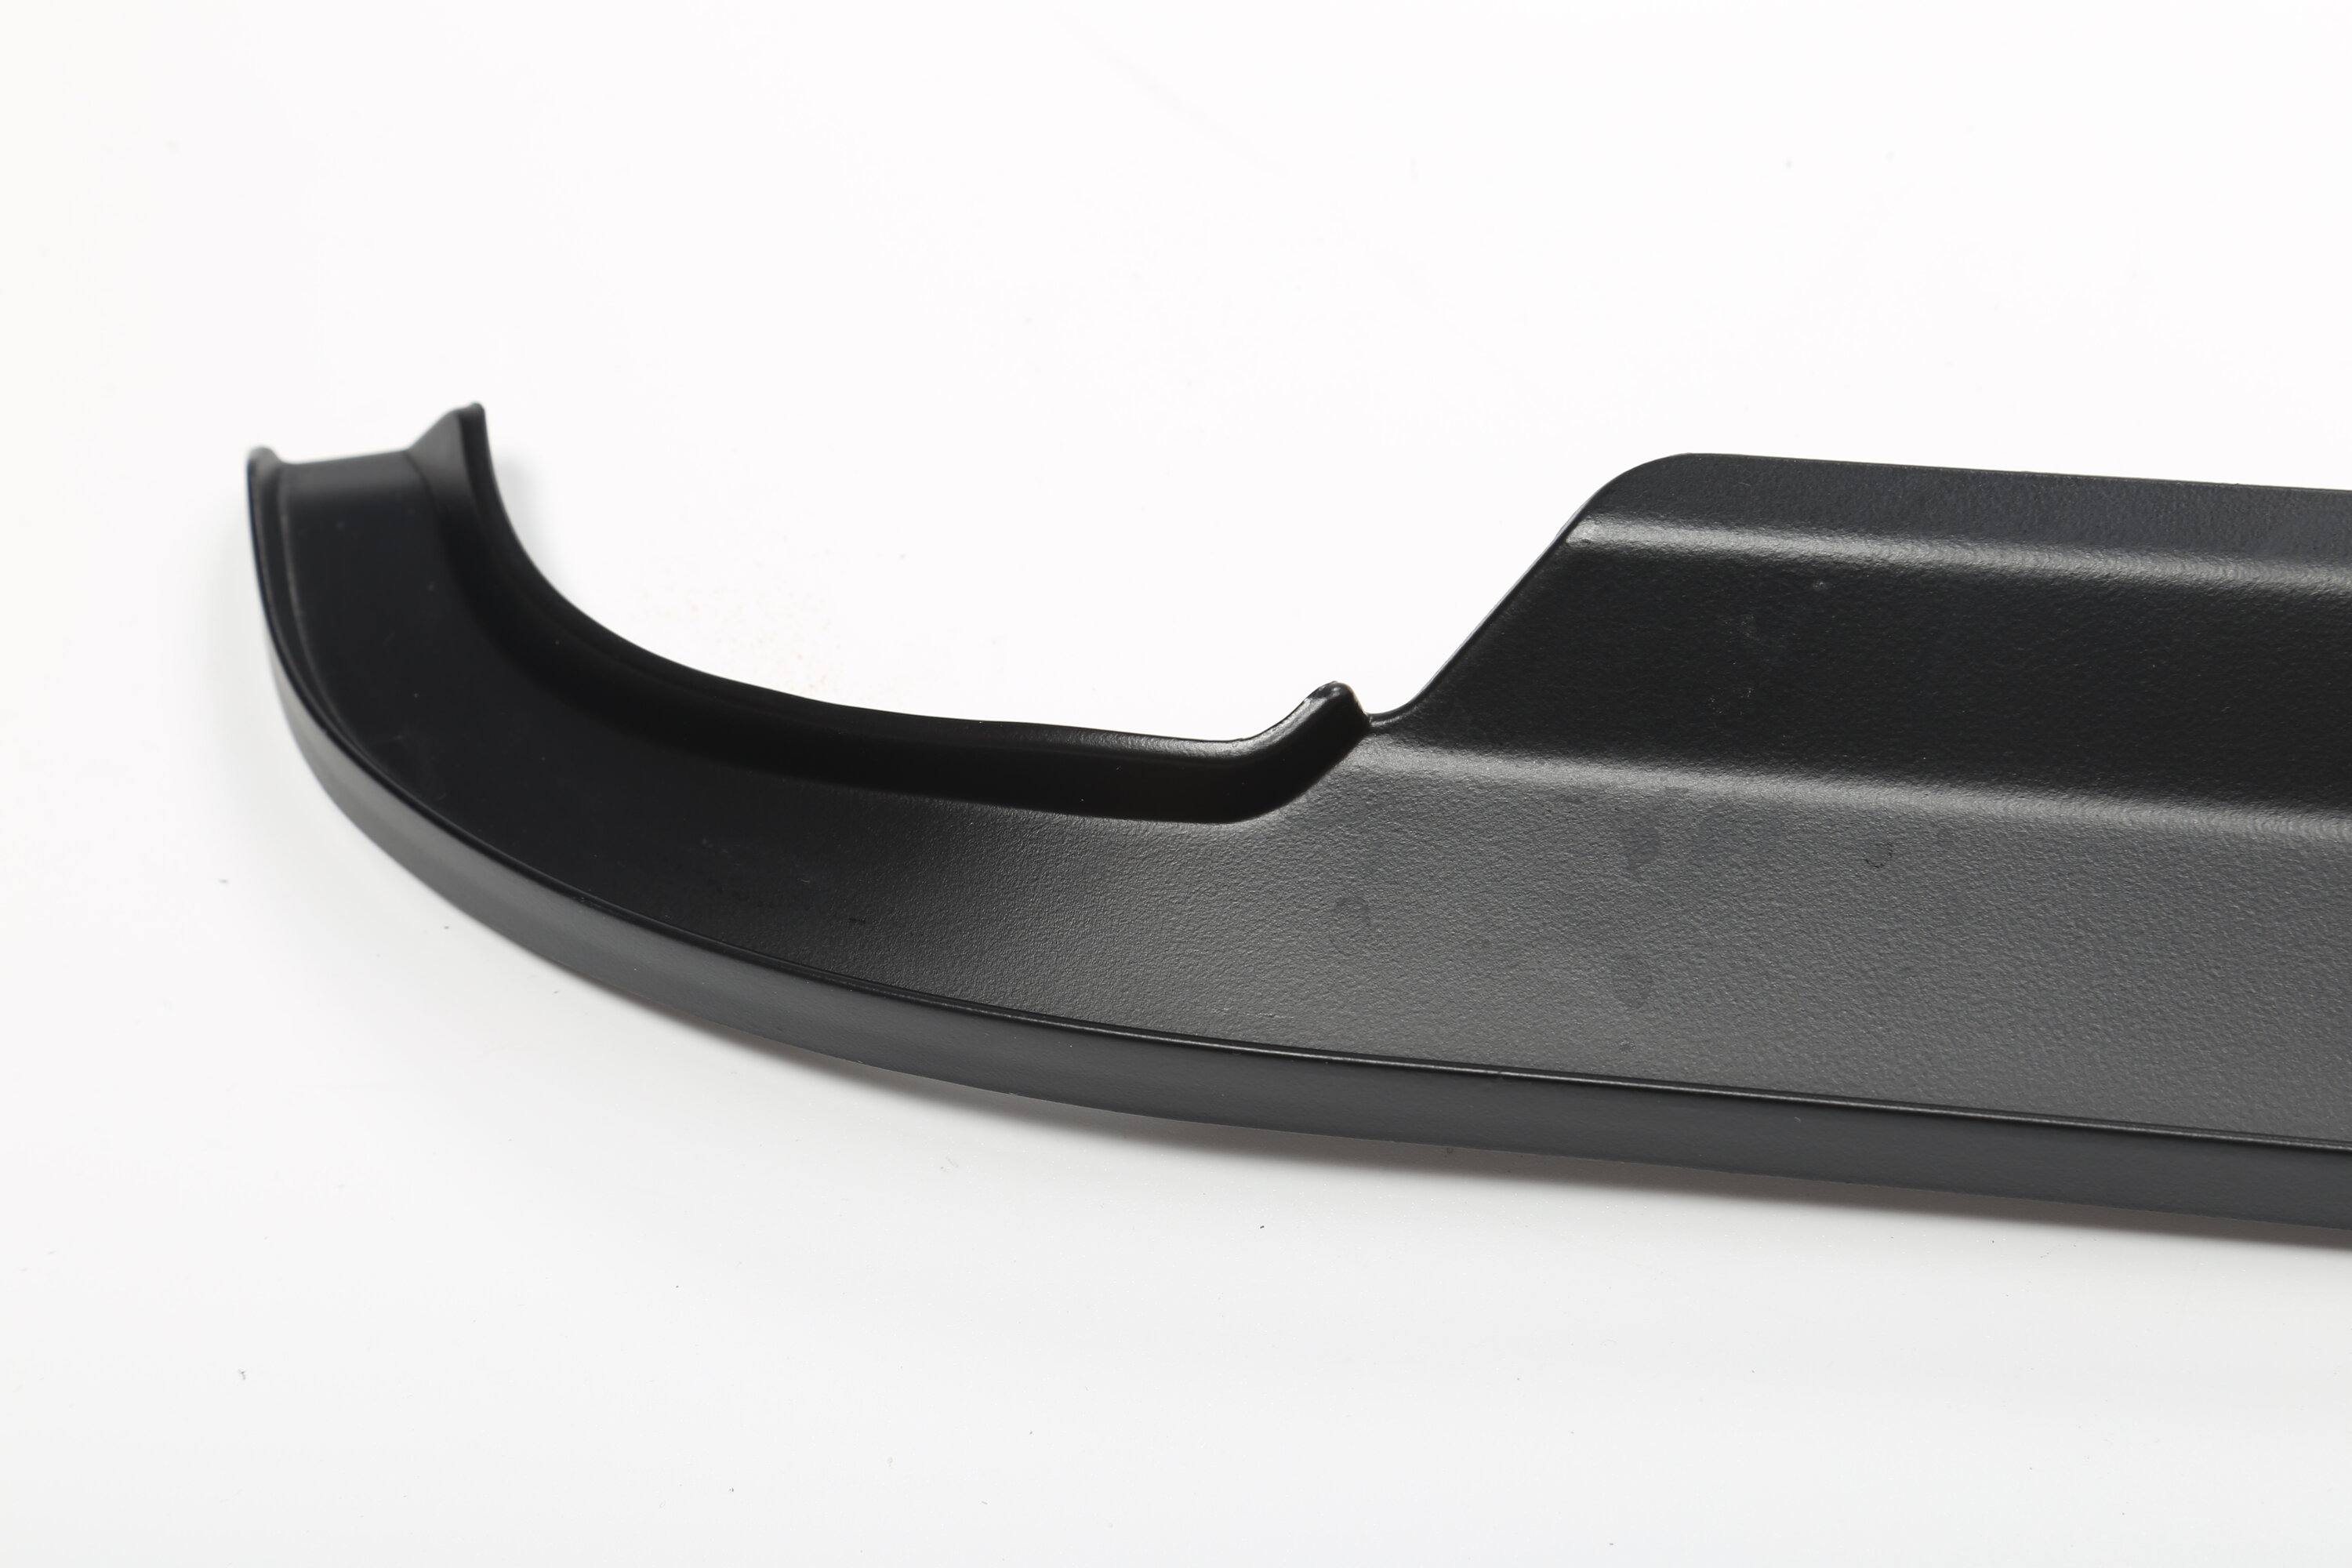 Ford Bronco Mabett Rain Guards Available Now! 17.JPG